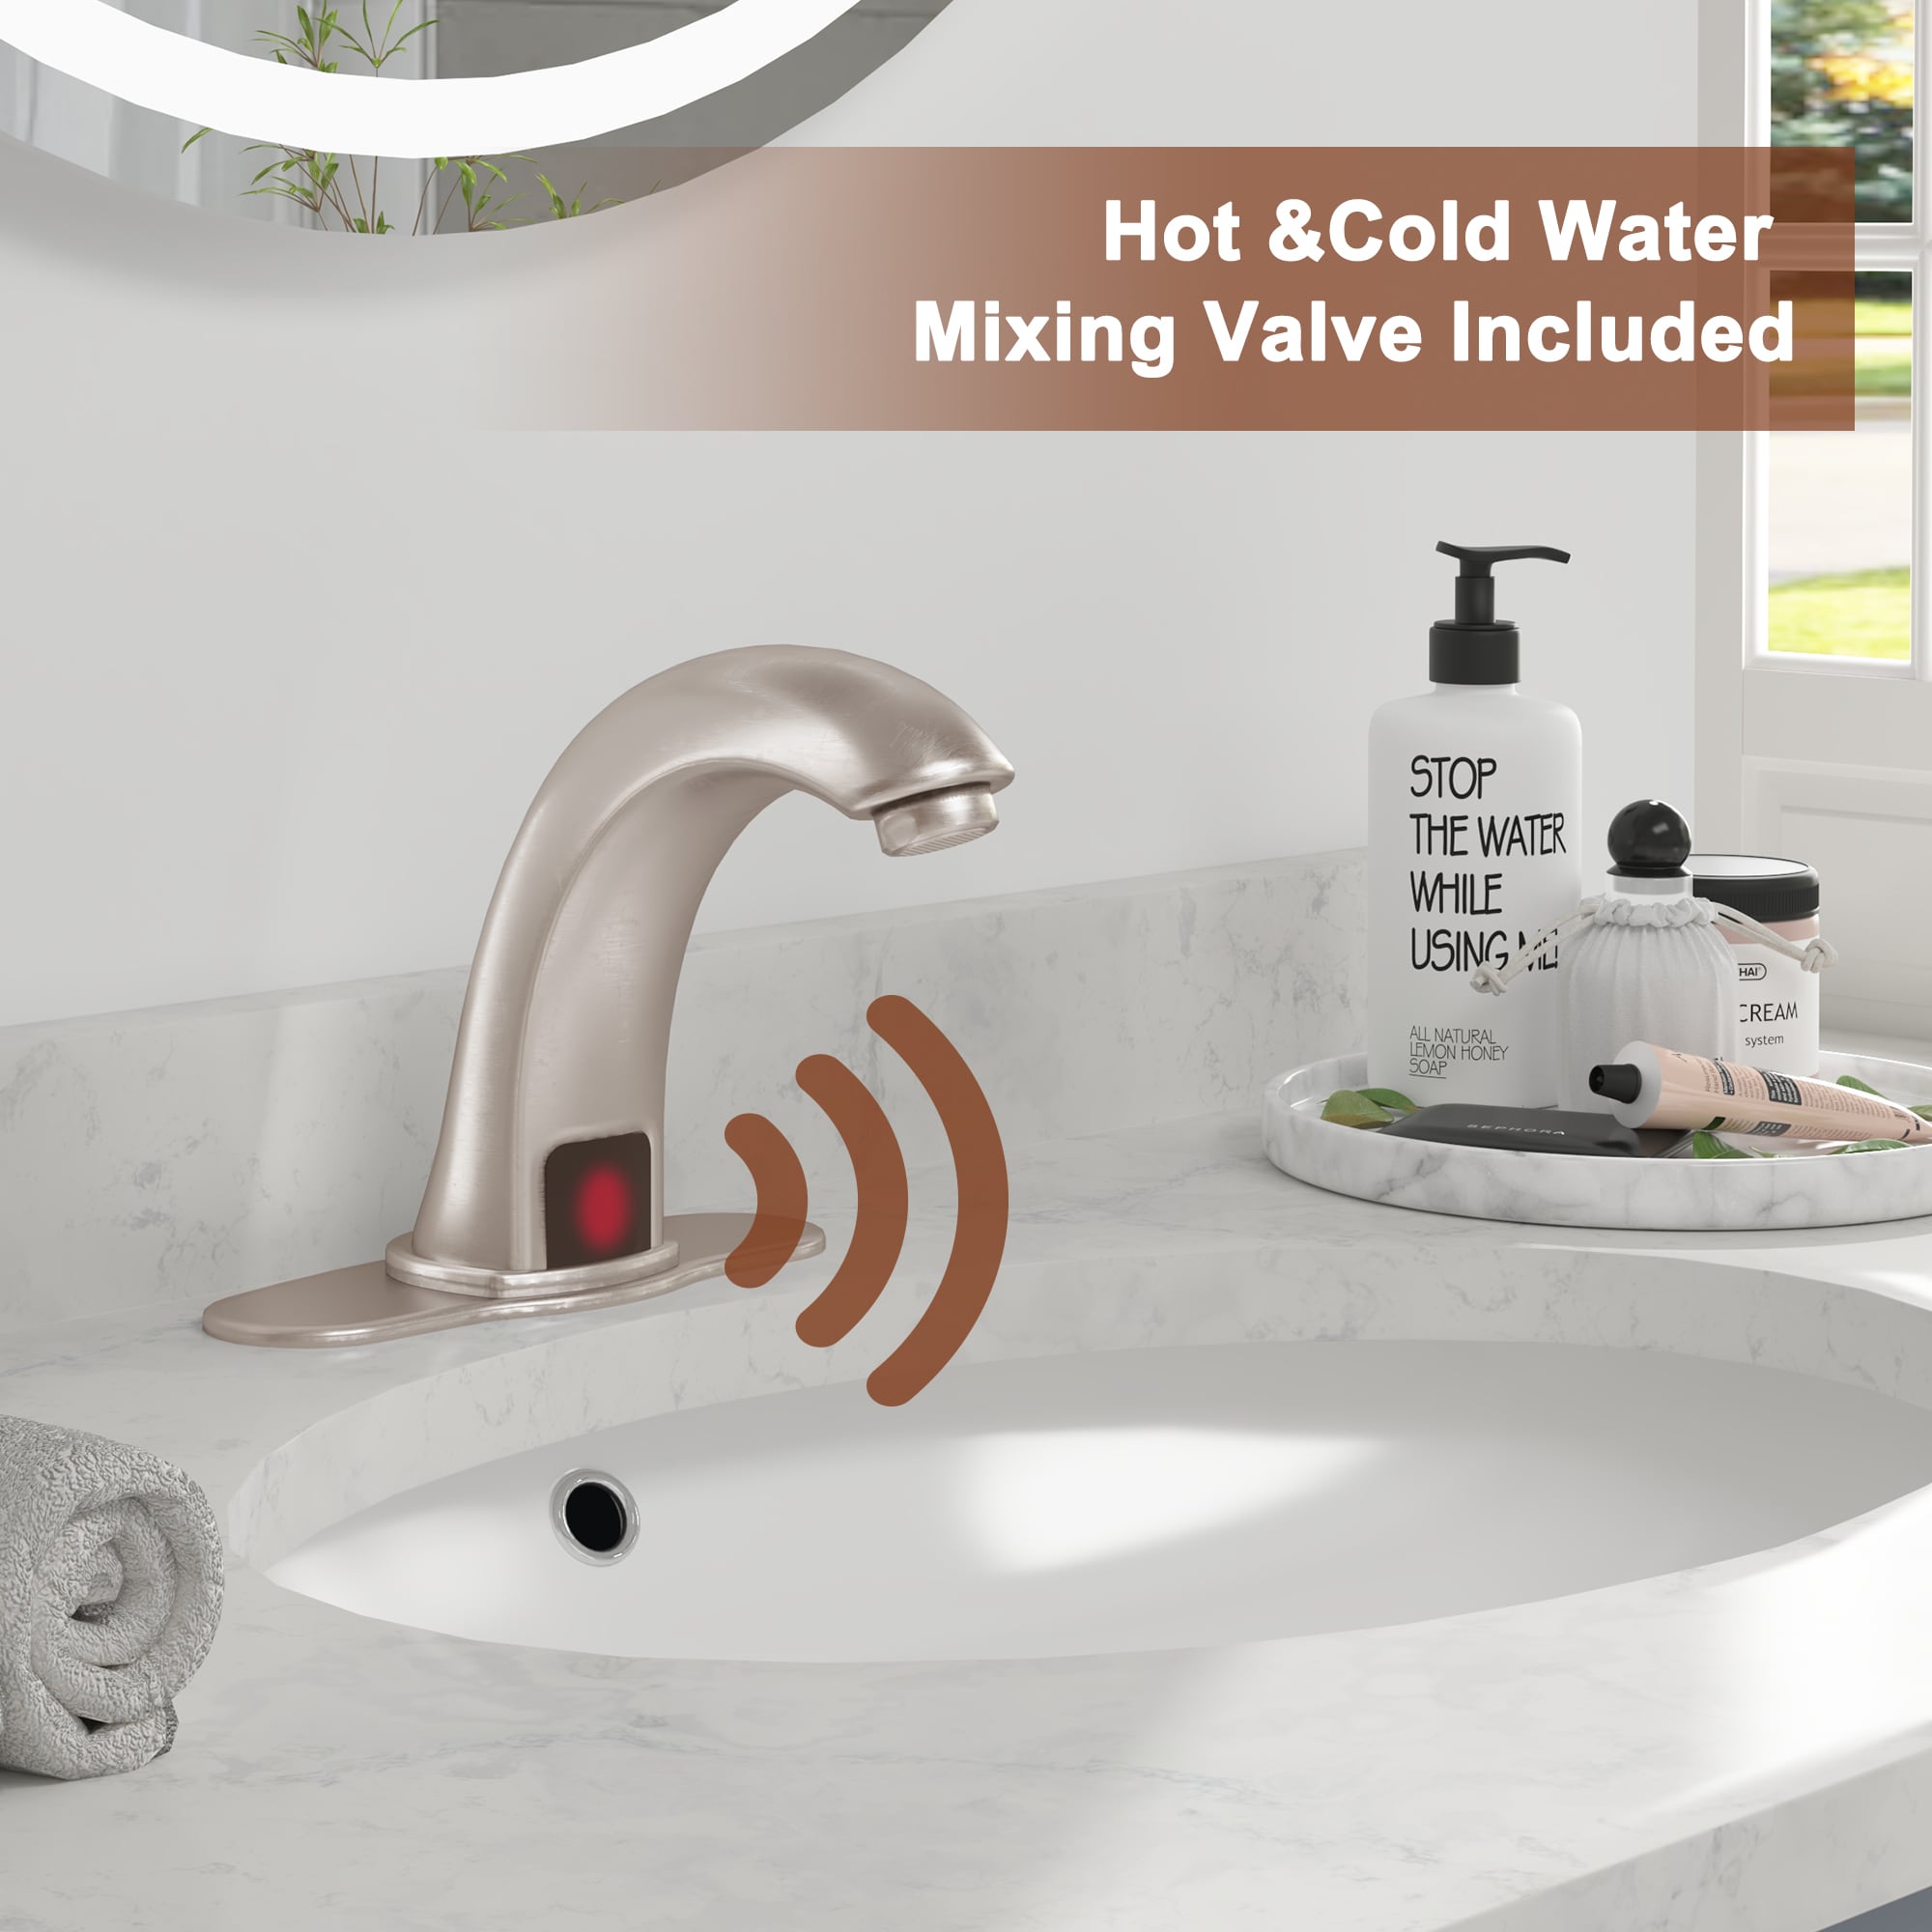 Cutting Edge Electronic Digital Touch Faucet Smart Sink Thermostatic Mixer Bathroom  Faucet with SensorThermostatic Thermostatic Mixer Smart Sink Thermostatic  Mixer Bathroom Faucet with Sensor Tap